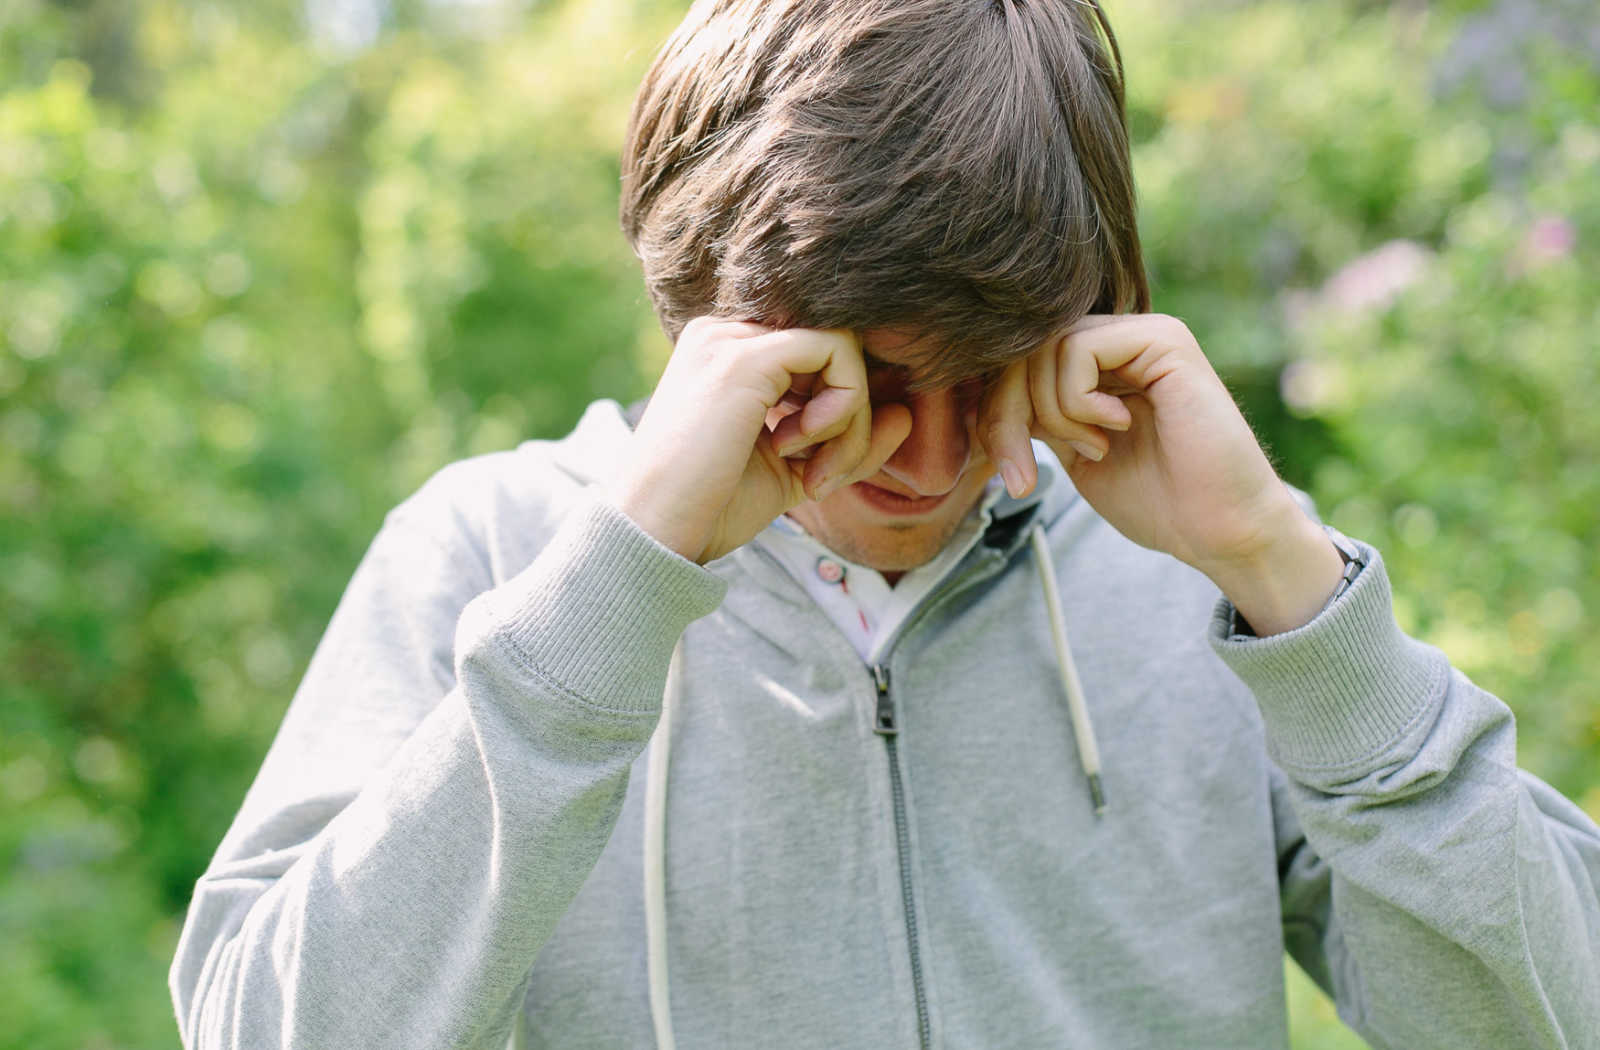 A young male standing outside rubbing his eyes.